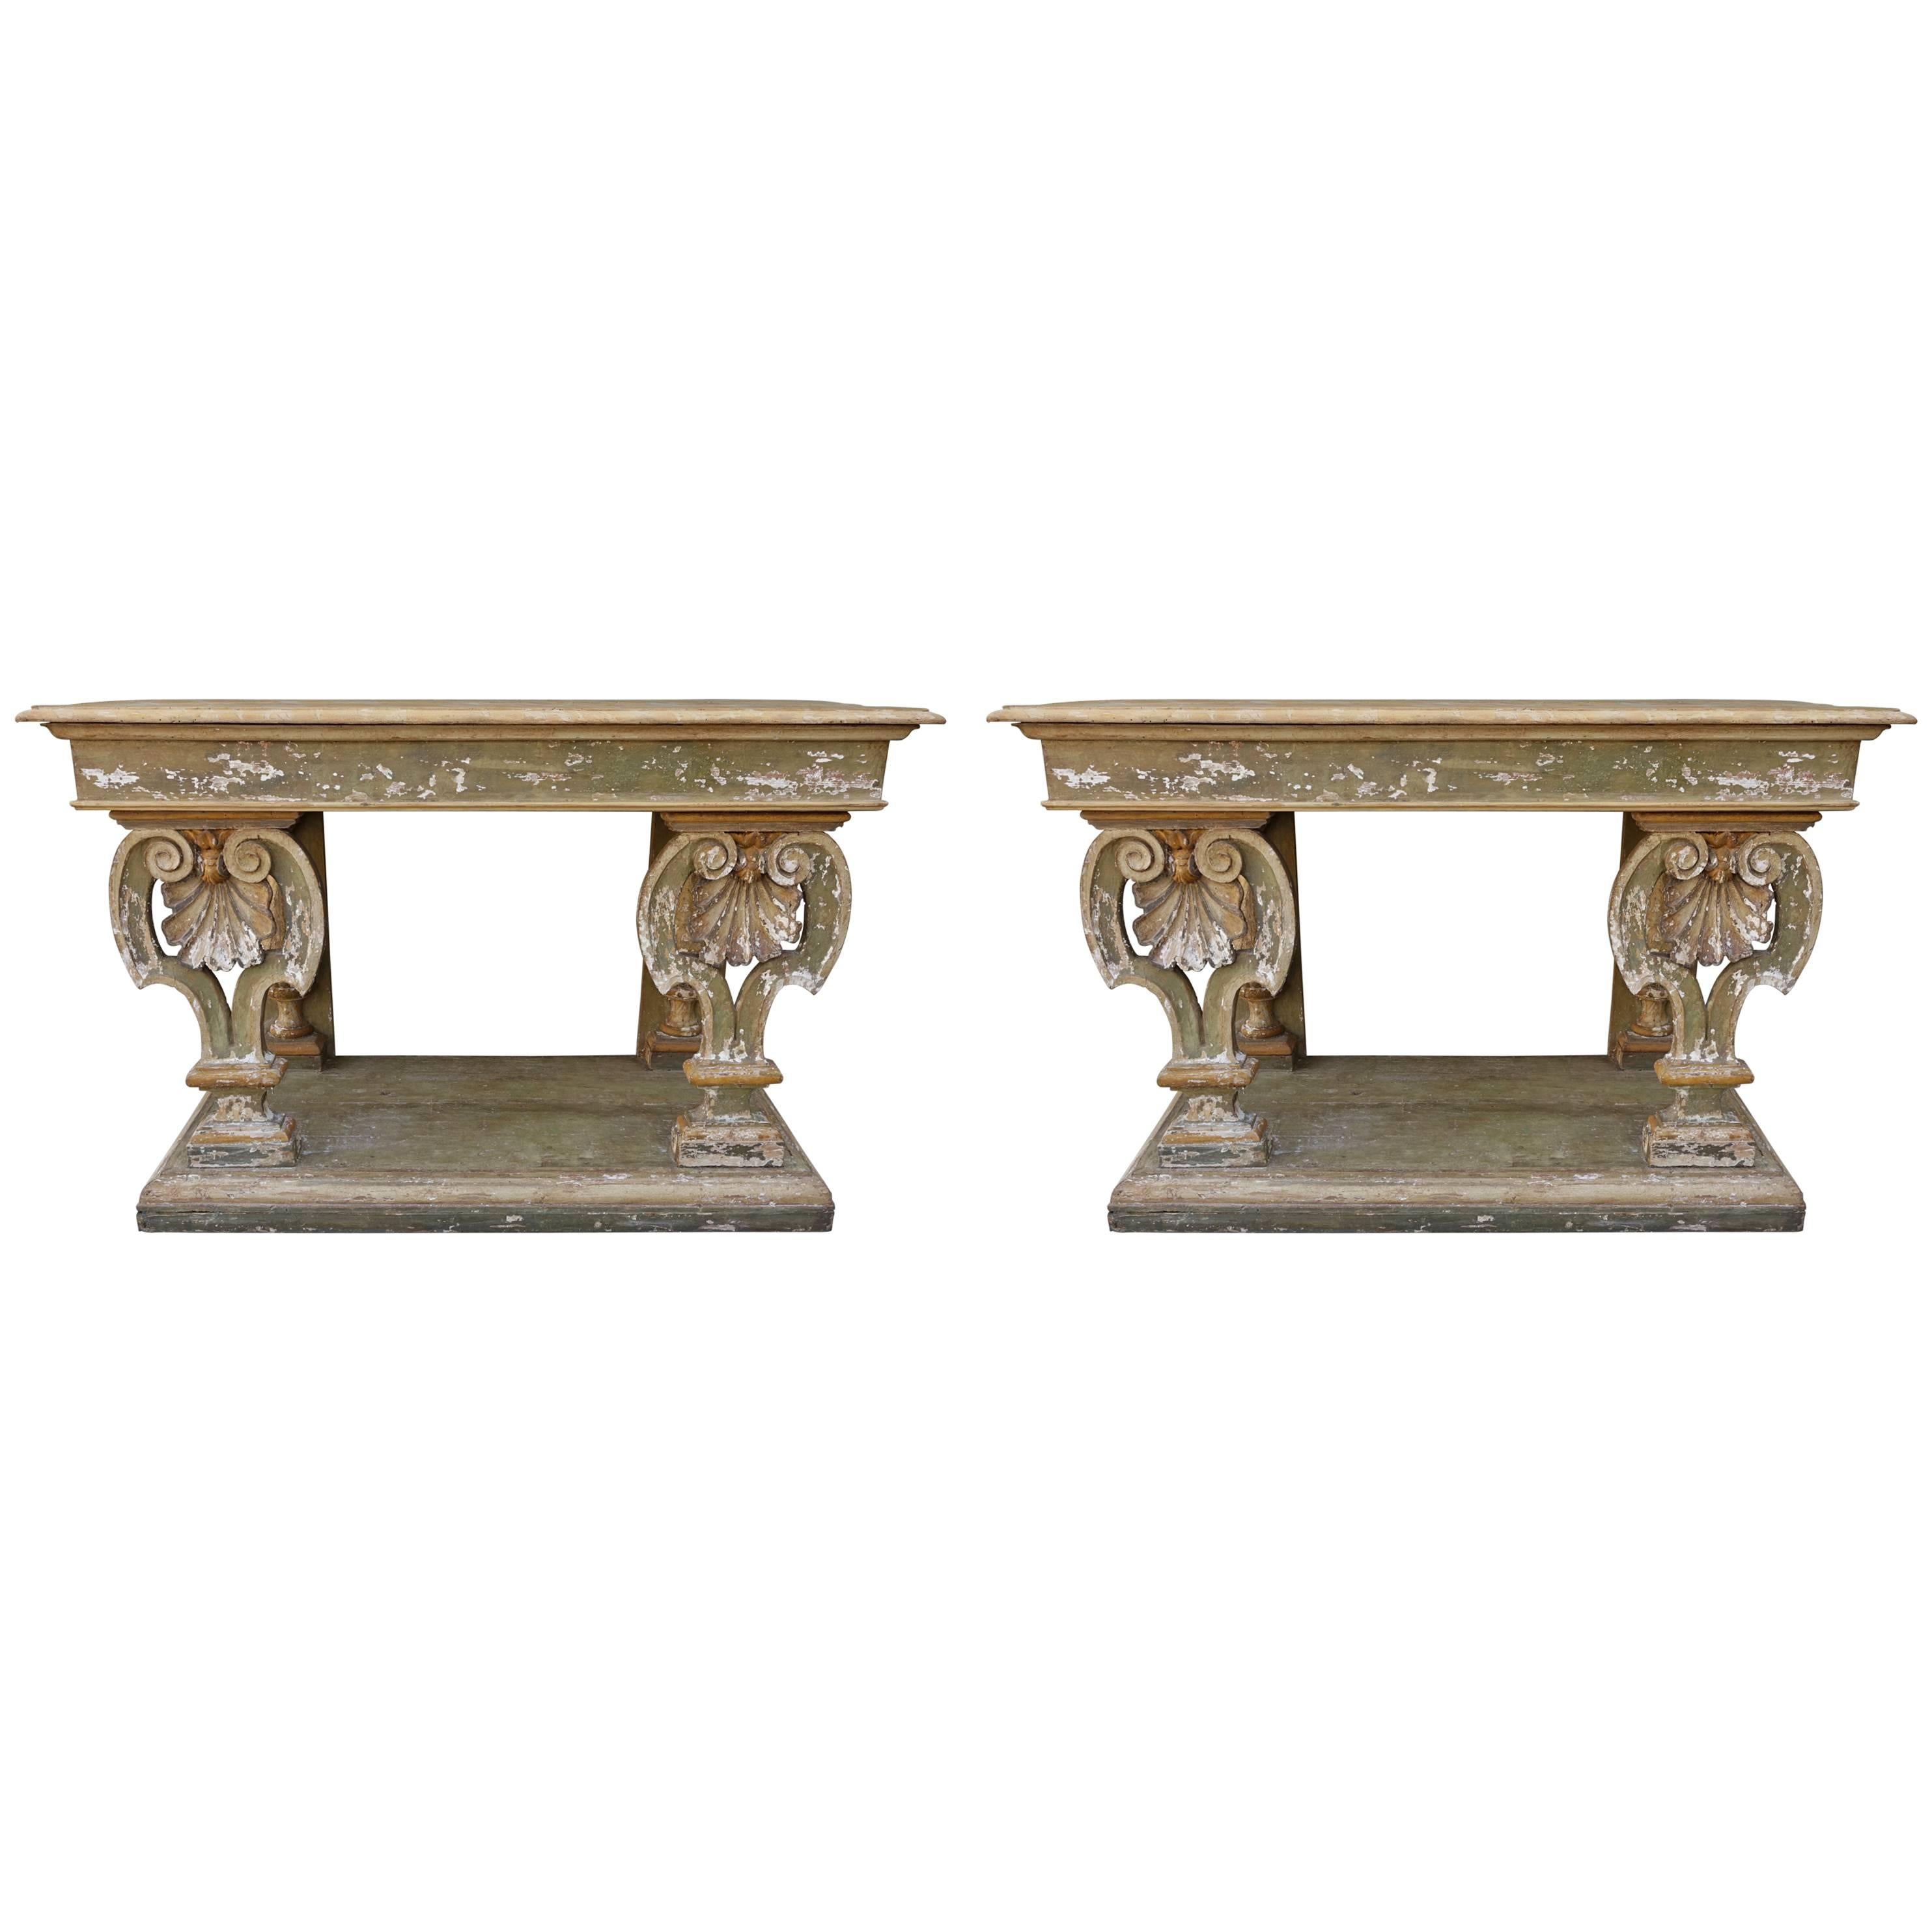 Pair of Early 19th Century Painted Italian Consoles